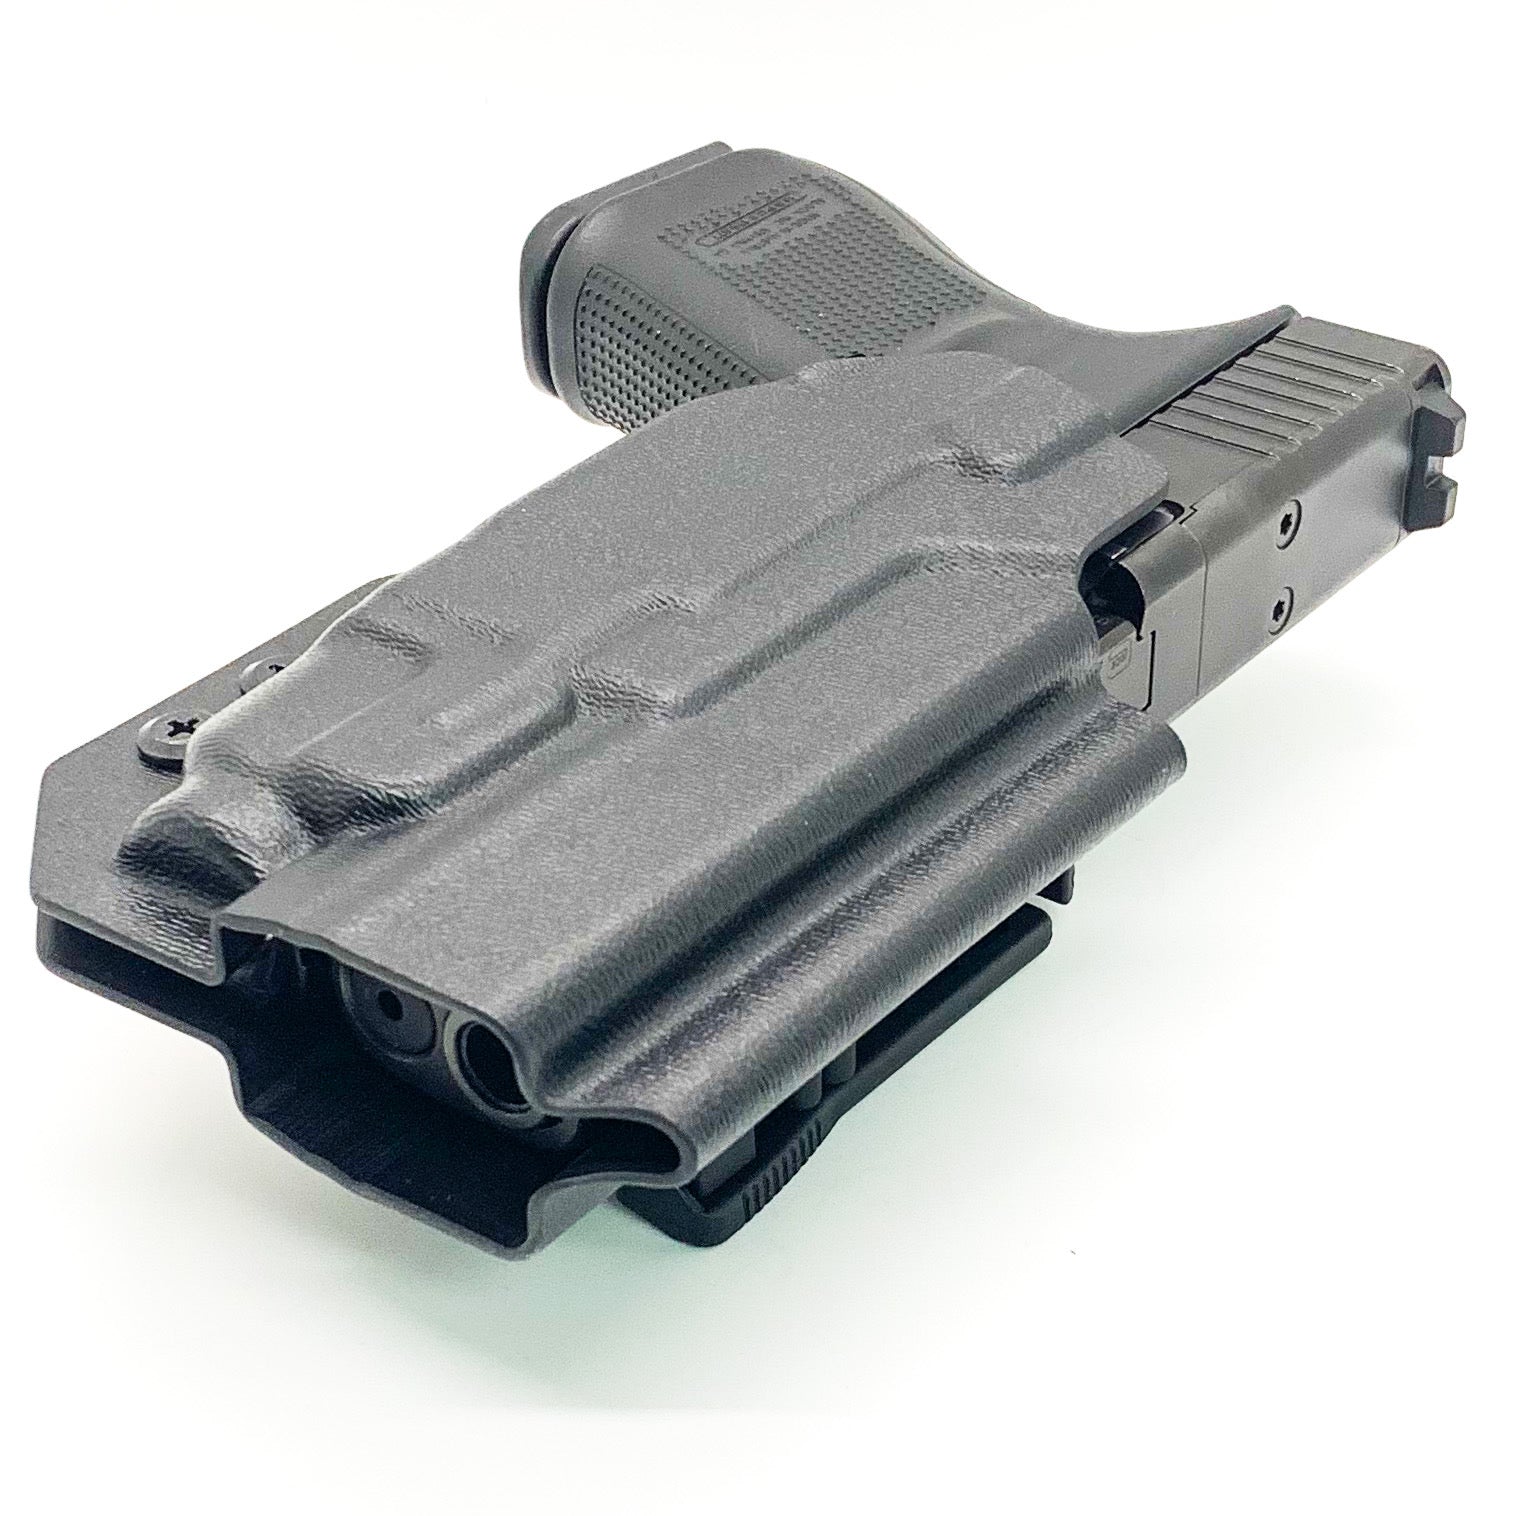 Outside Waistband Kydex holster designed to fit the Glock Gen 5 with the 19 length slide and the Streamlight TLR-7 or TLR-7A light. Full sweat guard, adjustable retention, profiled for a red dot optic. Minimal material and smooth edges to reduce printing. Proudly made in the USA. 